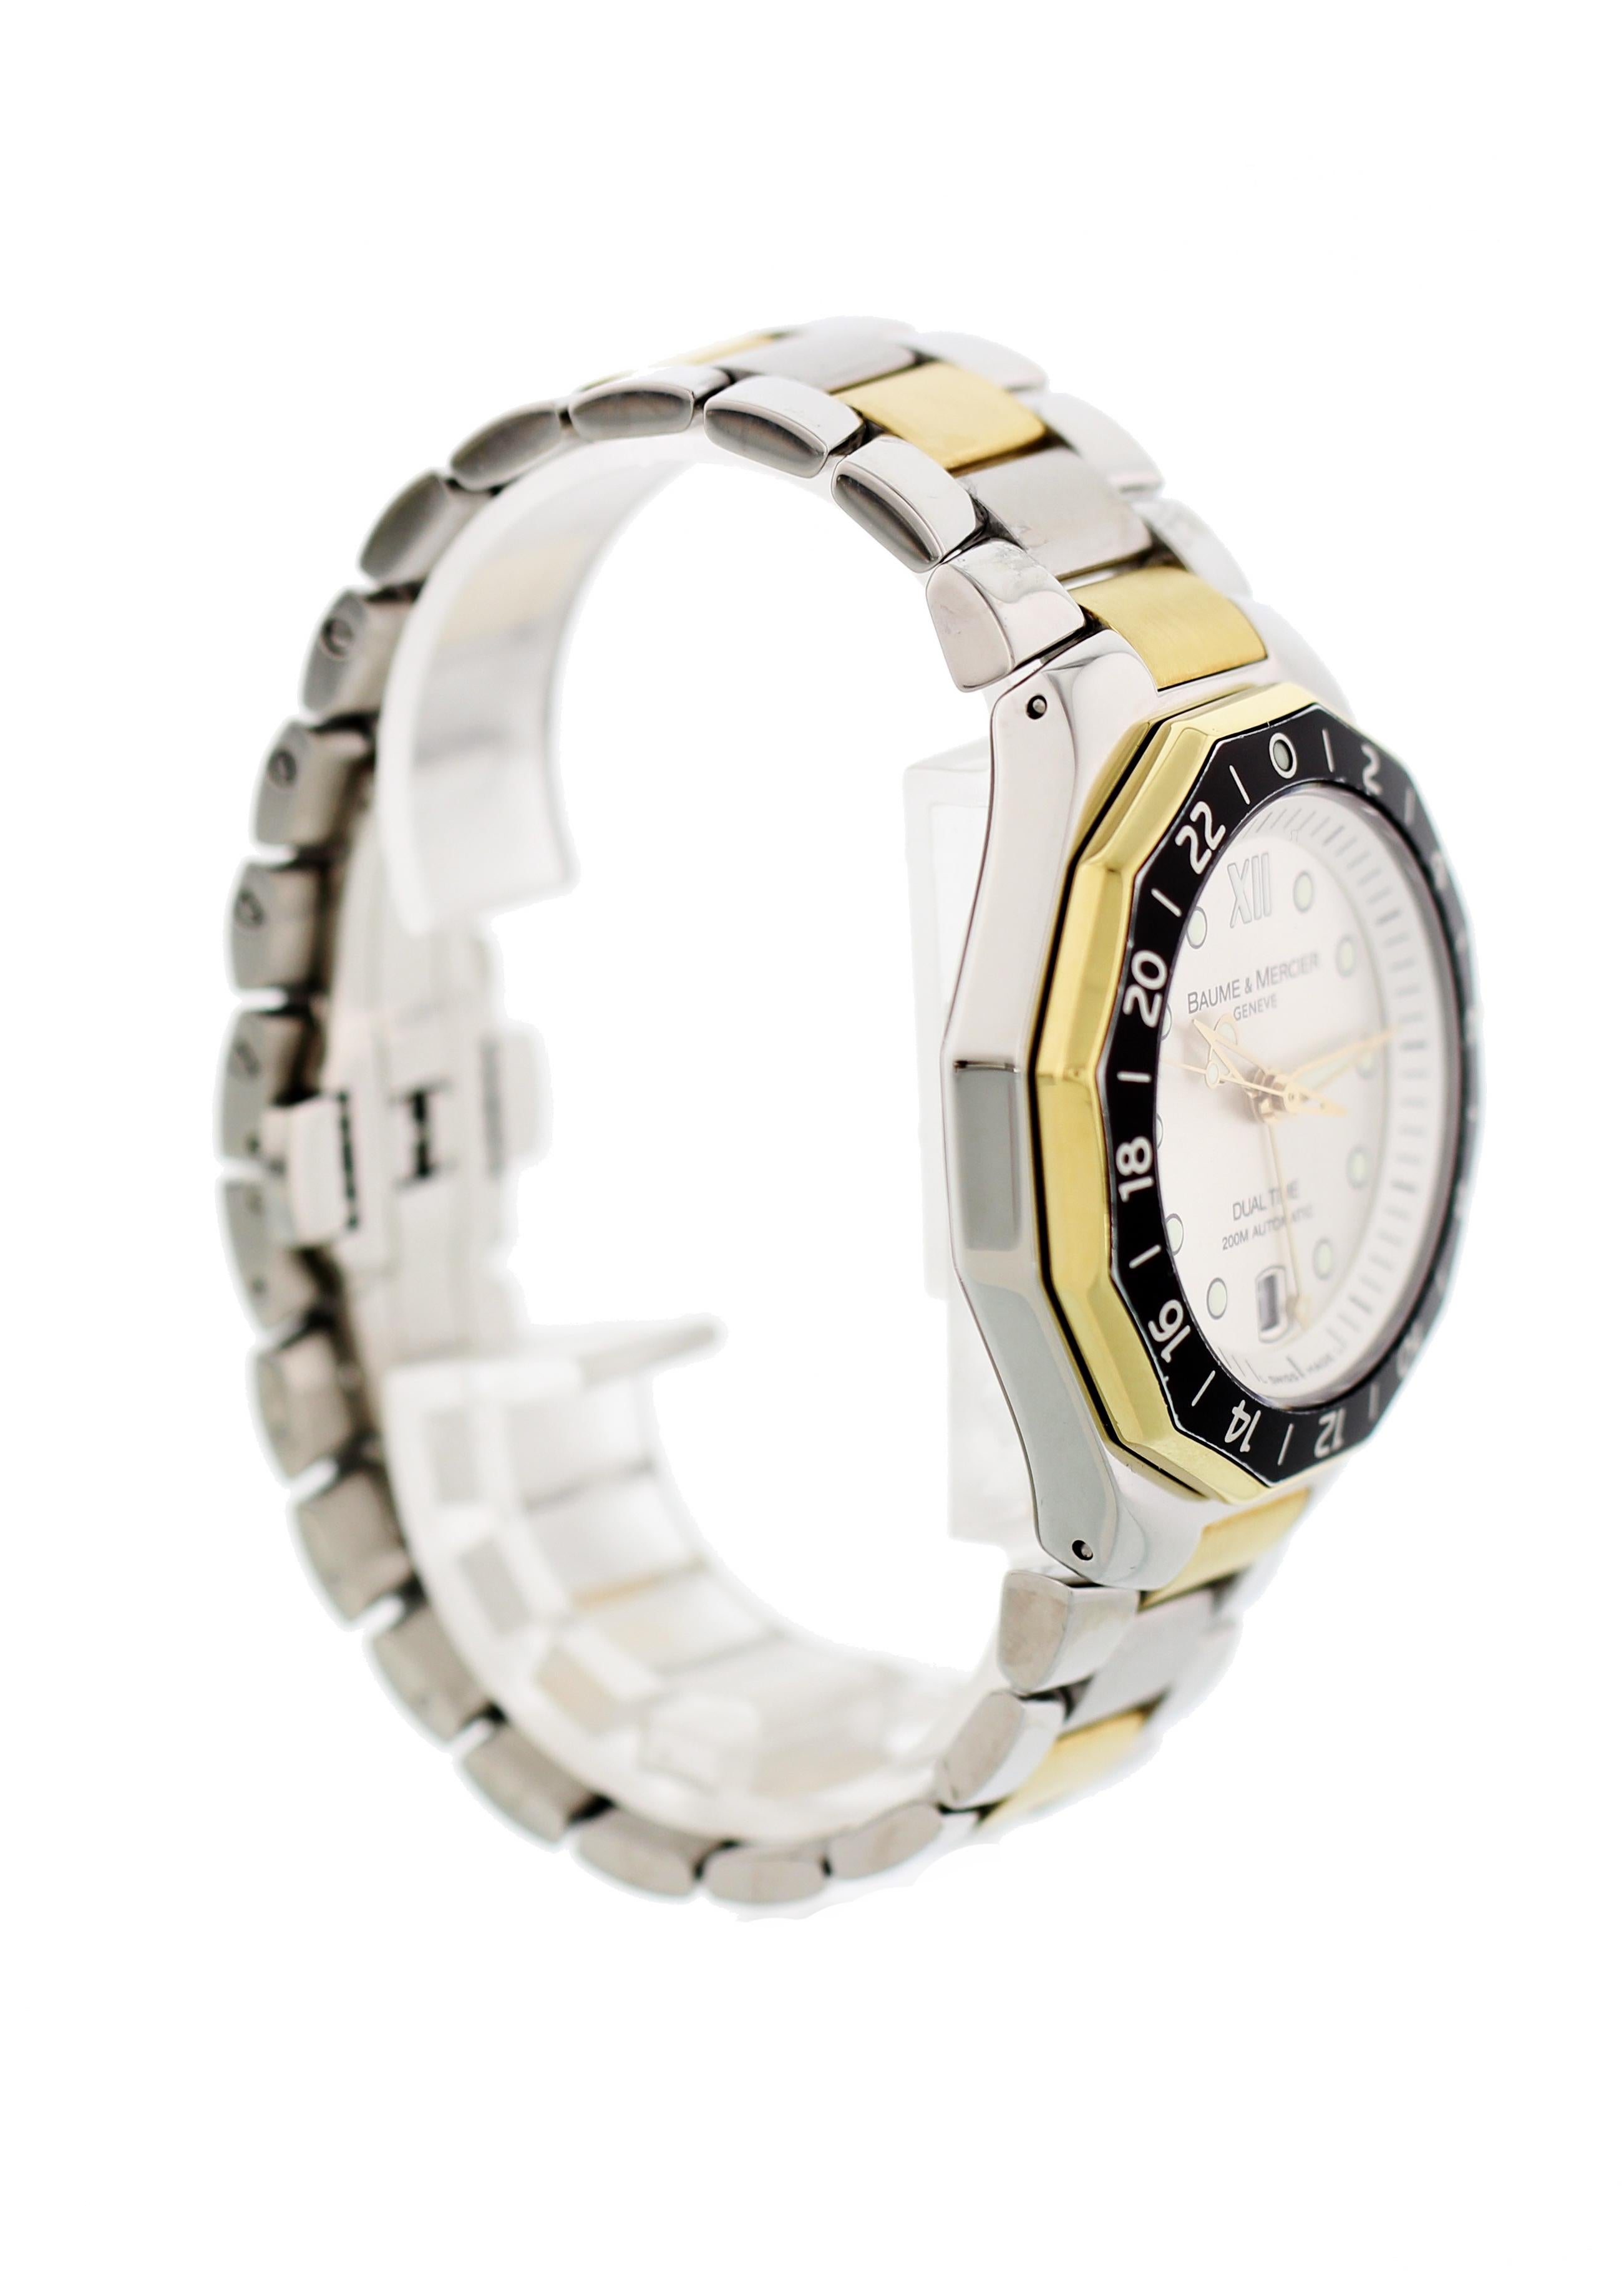 Men's Baume & Mercier Riviera Dual Time. Stainless steel 40mm case. 18k yellow gold bezel with black 24 hour insert. Two tone stainless steel and yellow gold caped bracelet will fit a 6.75 inch wrist. Silver dial with luminous hands and hour